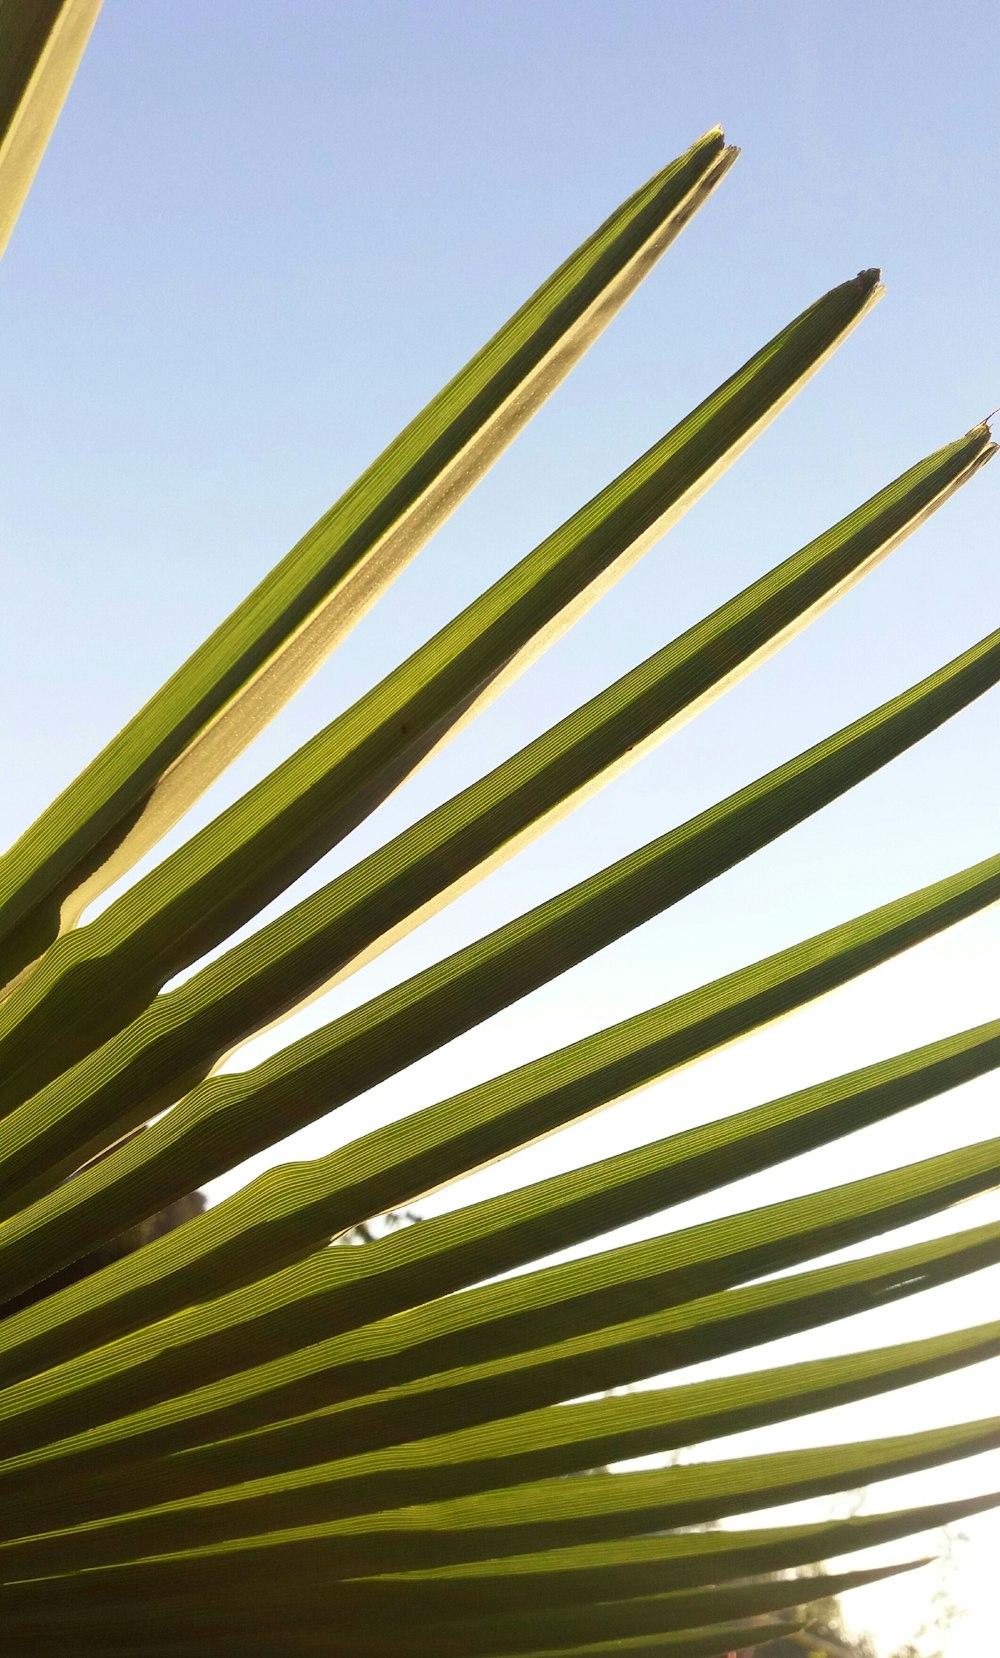 a close up of a palm tree with a blue sky in the background